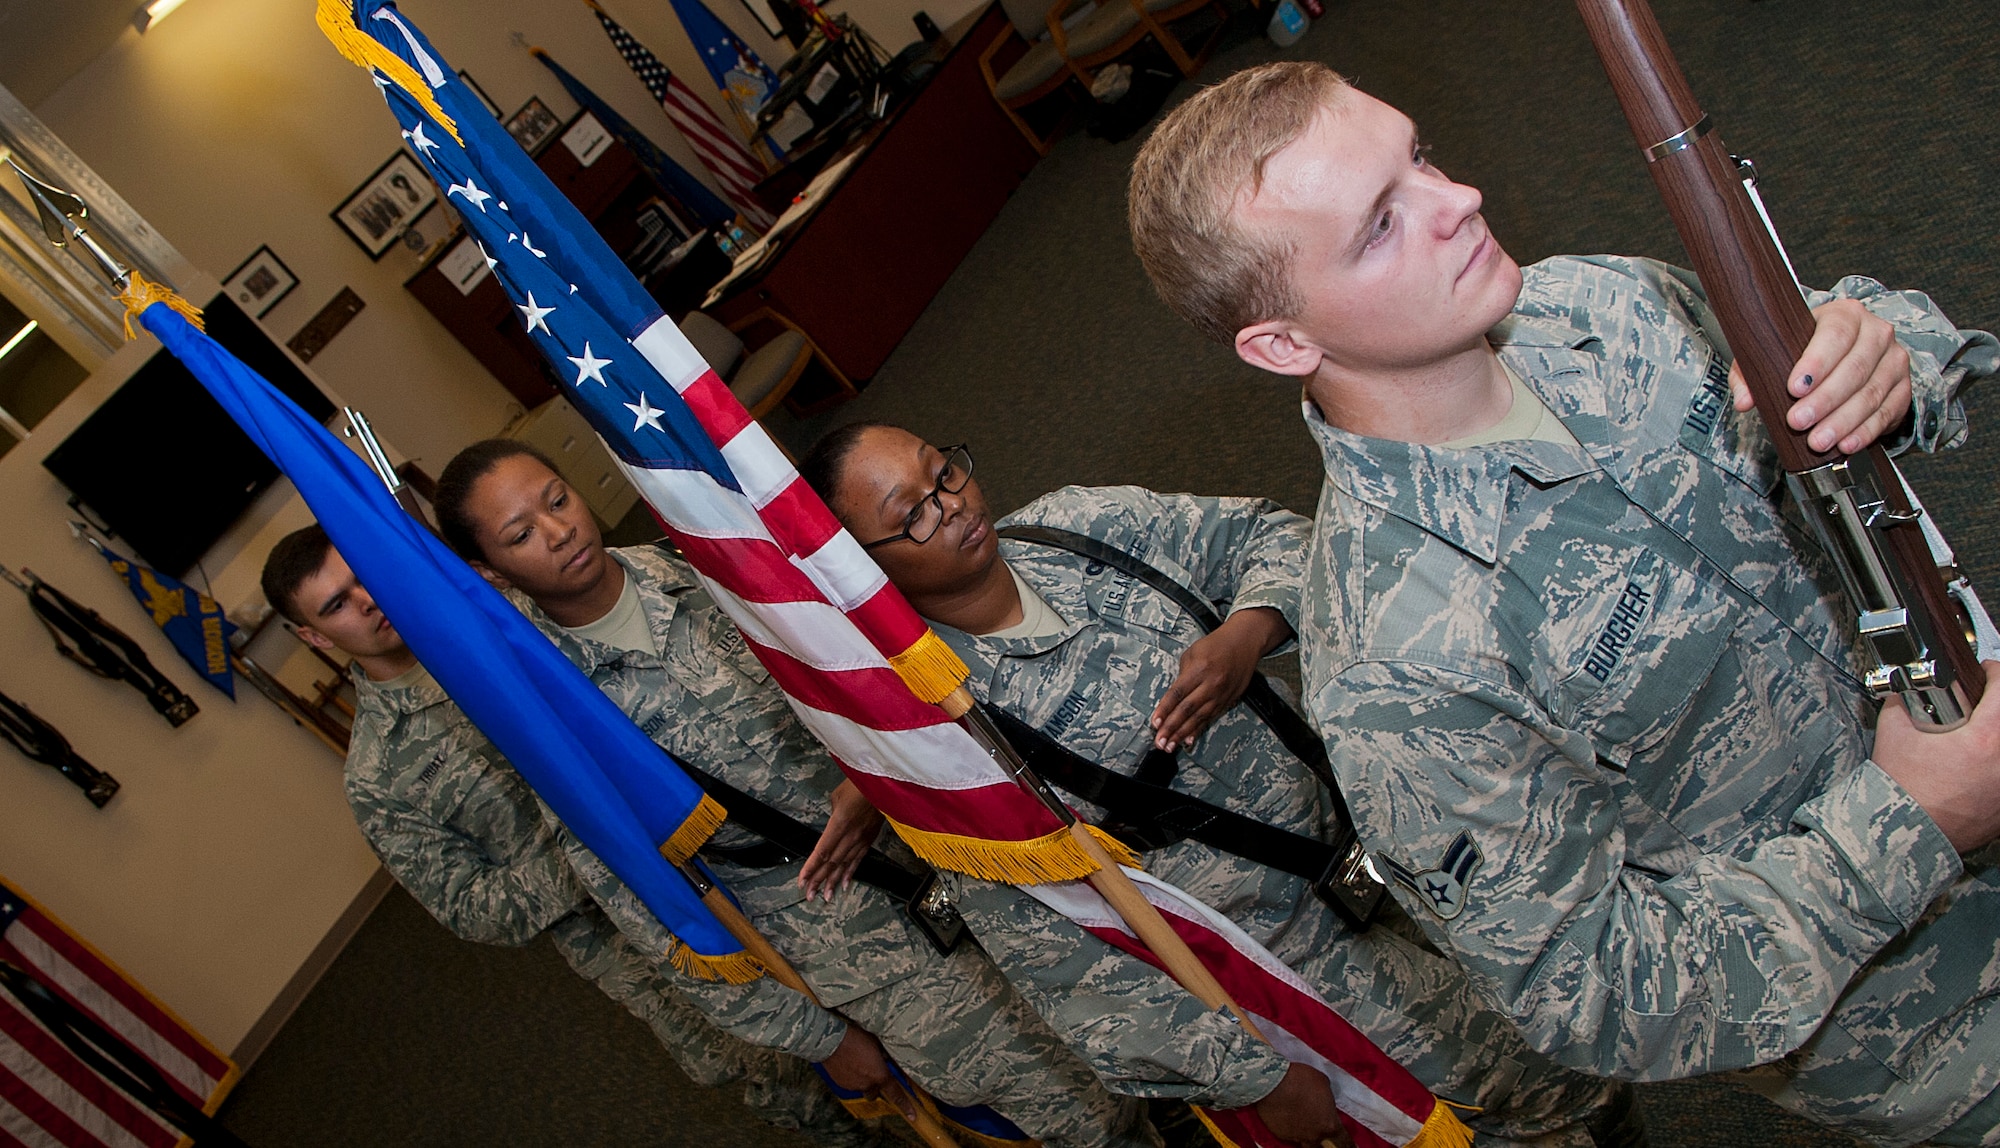 Airmen with the Minot Air Force Base Honor Guard go through color team training at Minot Air Force Base, N.D., Sept. 29, 2016. A color team is a four-Airman team which consists of Airmen carrying a lead rifle, the American flag, the Air Force flag and a trail rifle. (U.S. Air Force photo/Airman 1st Class Jonathan McElderry)